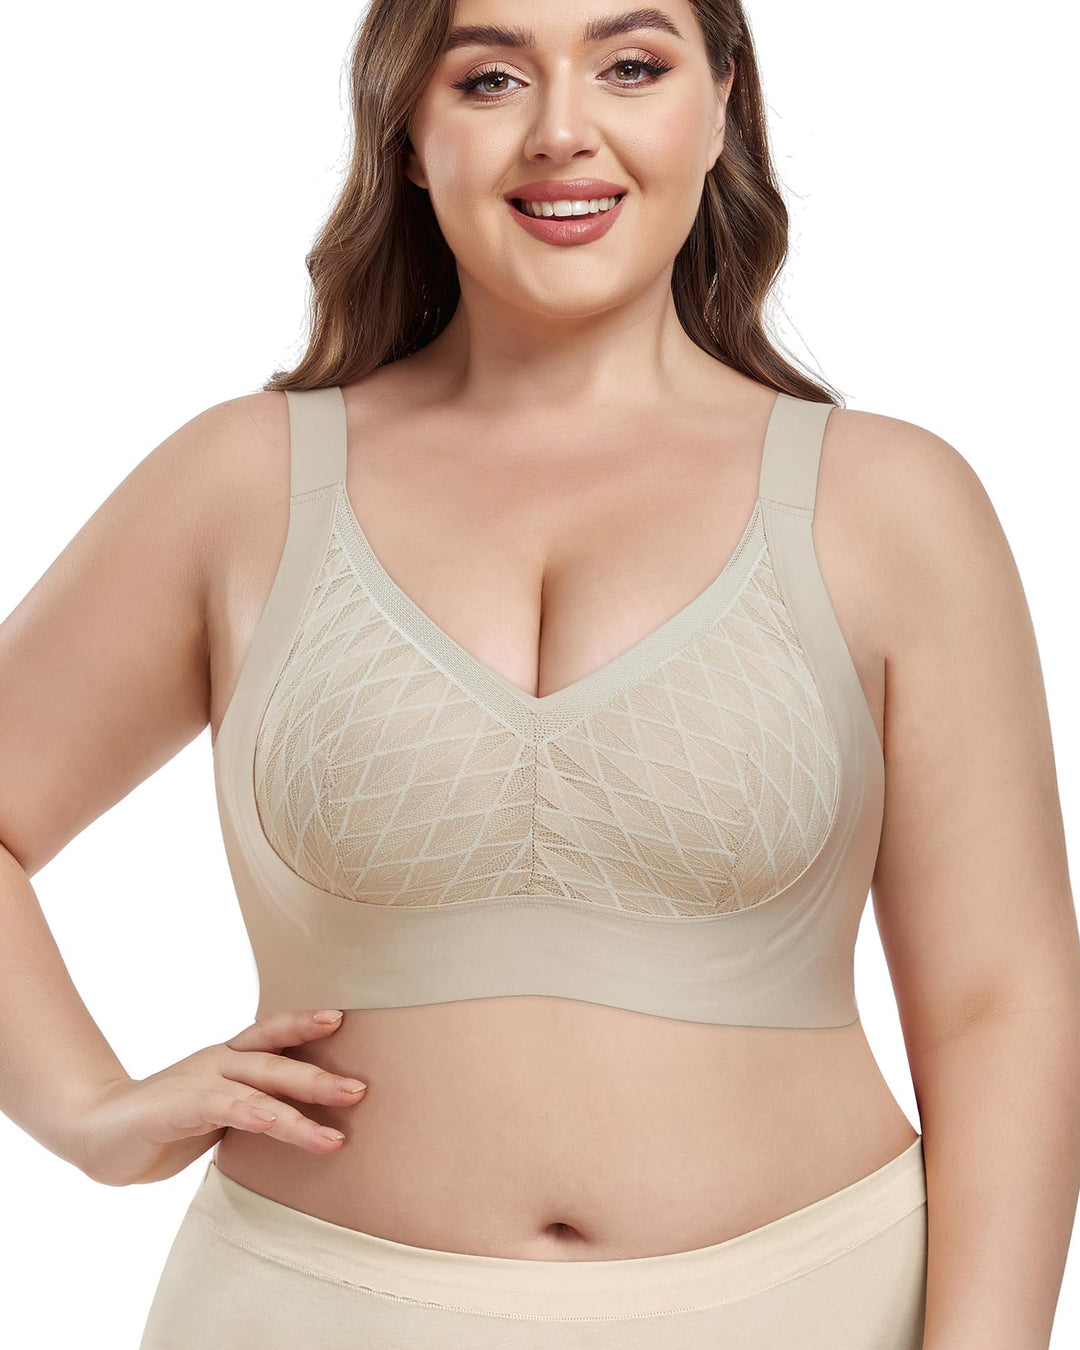 HORISUN Wireless Bras for Large Breasted Women Smoothing Seamless